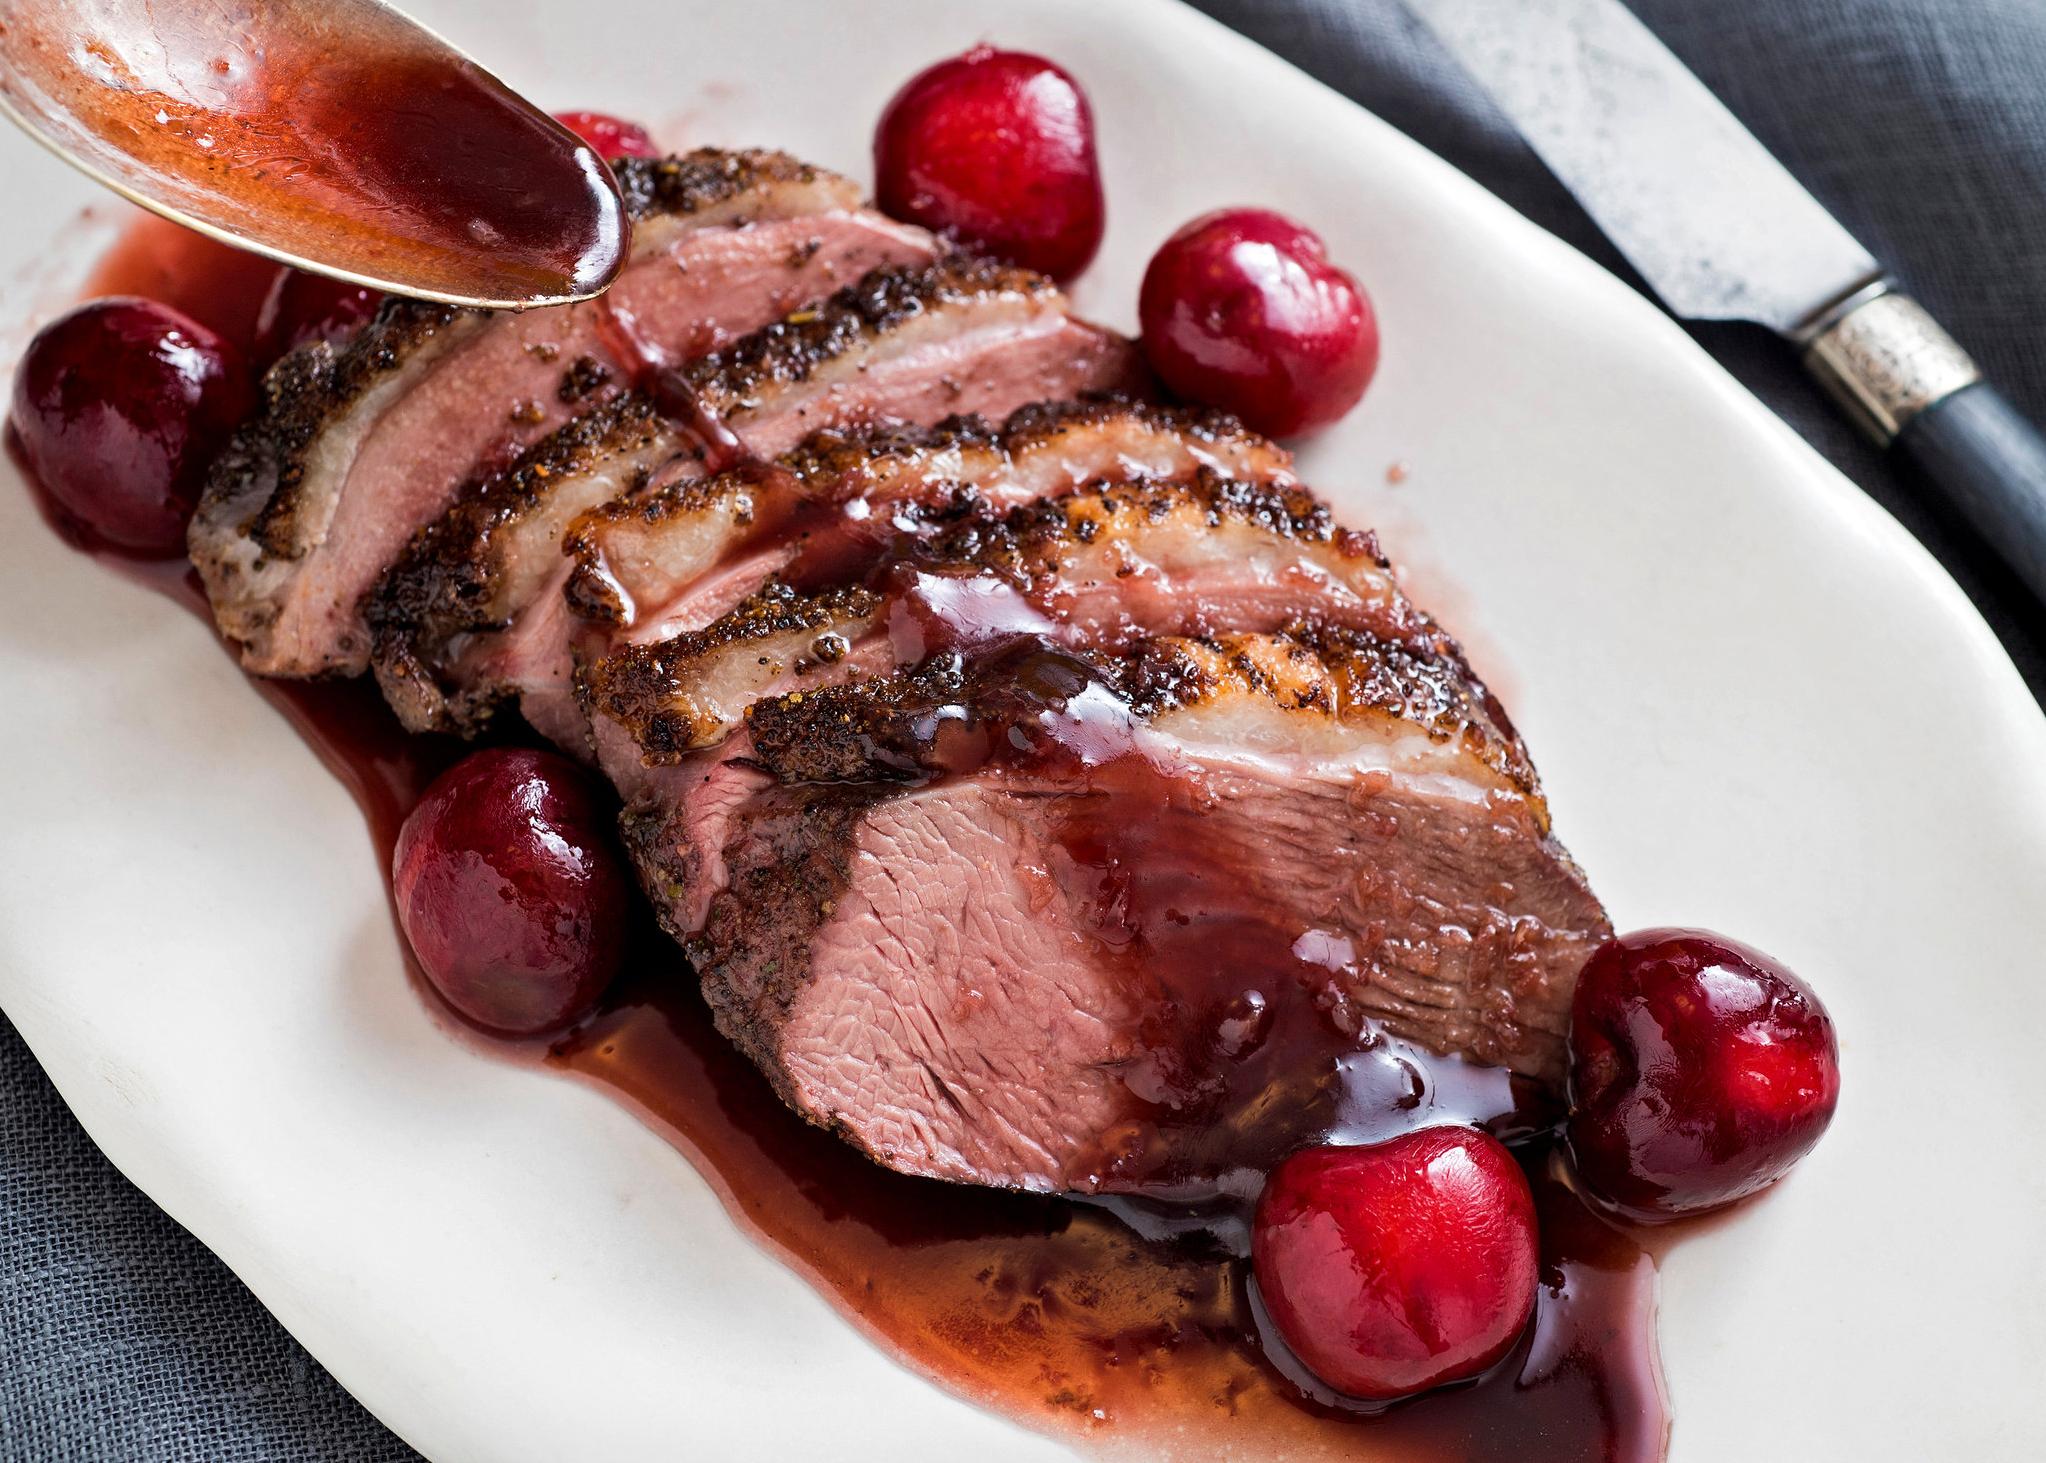  Use a good quality red wine for maximum flavor.